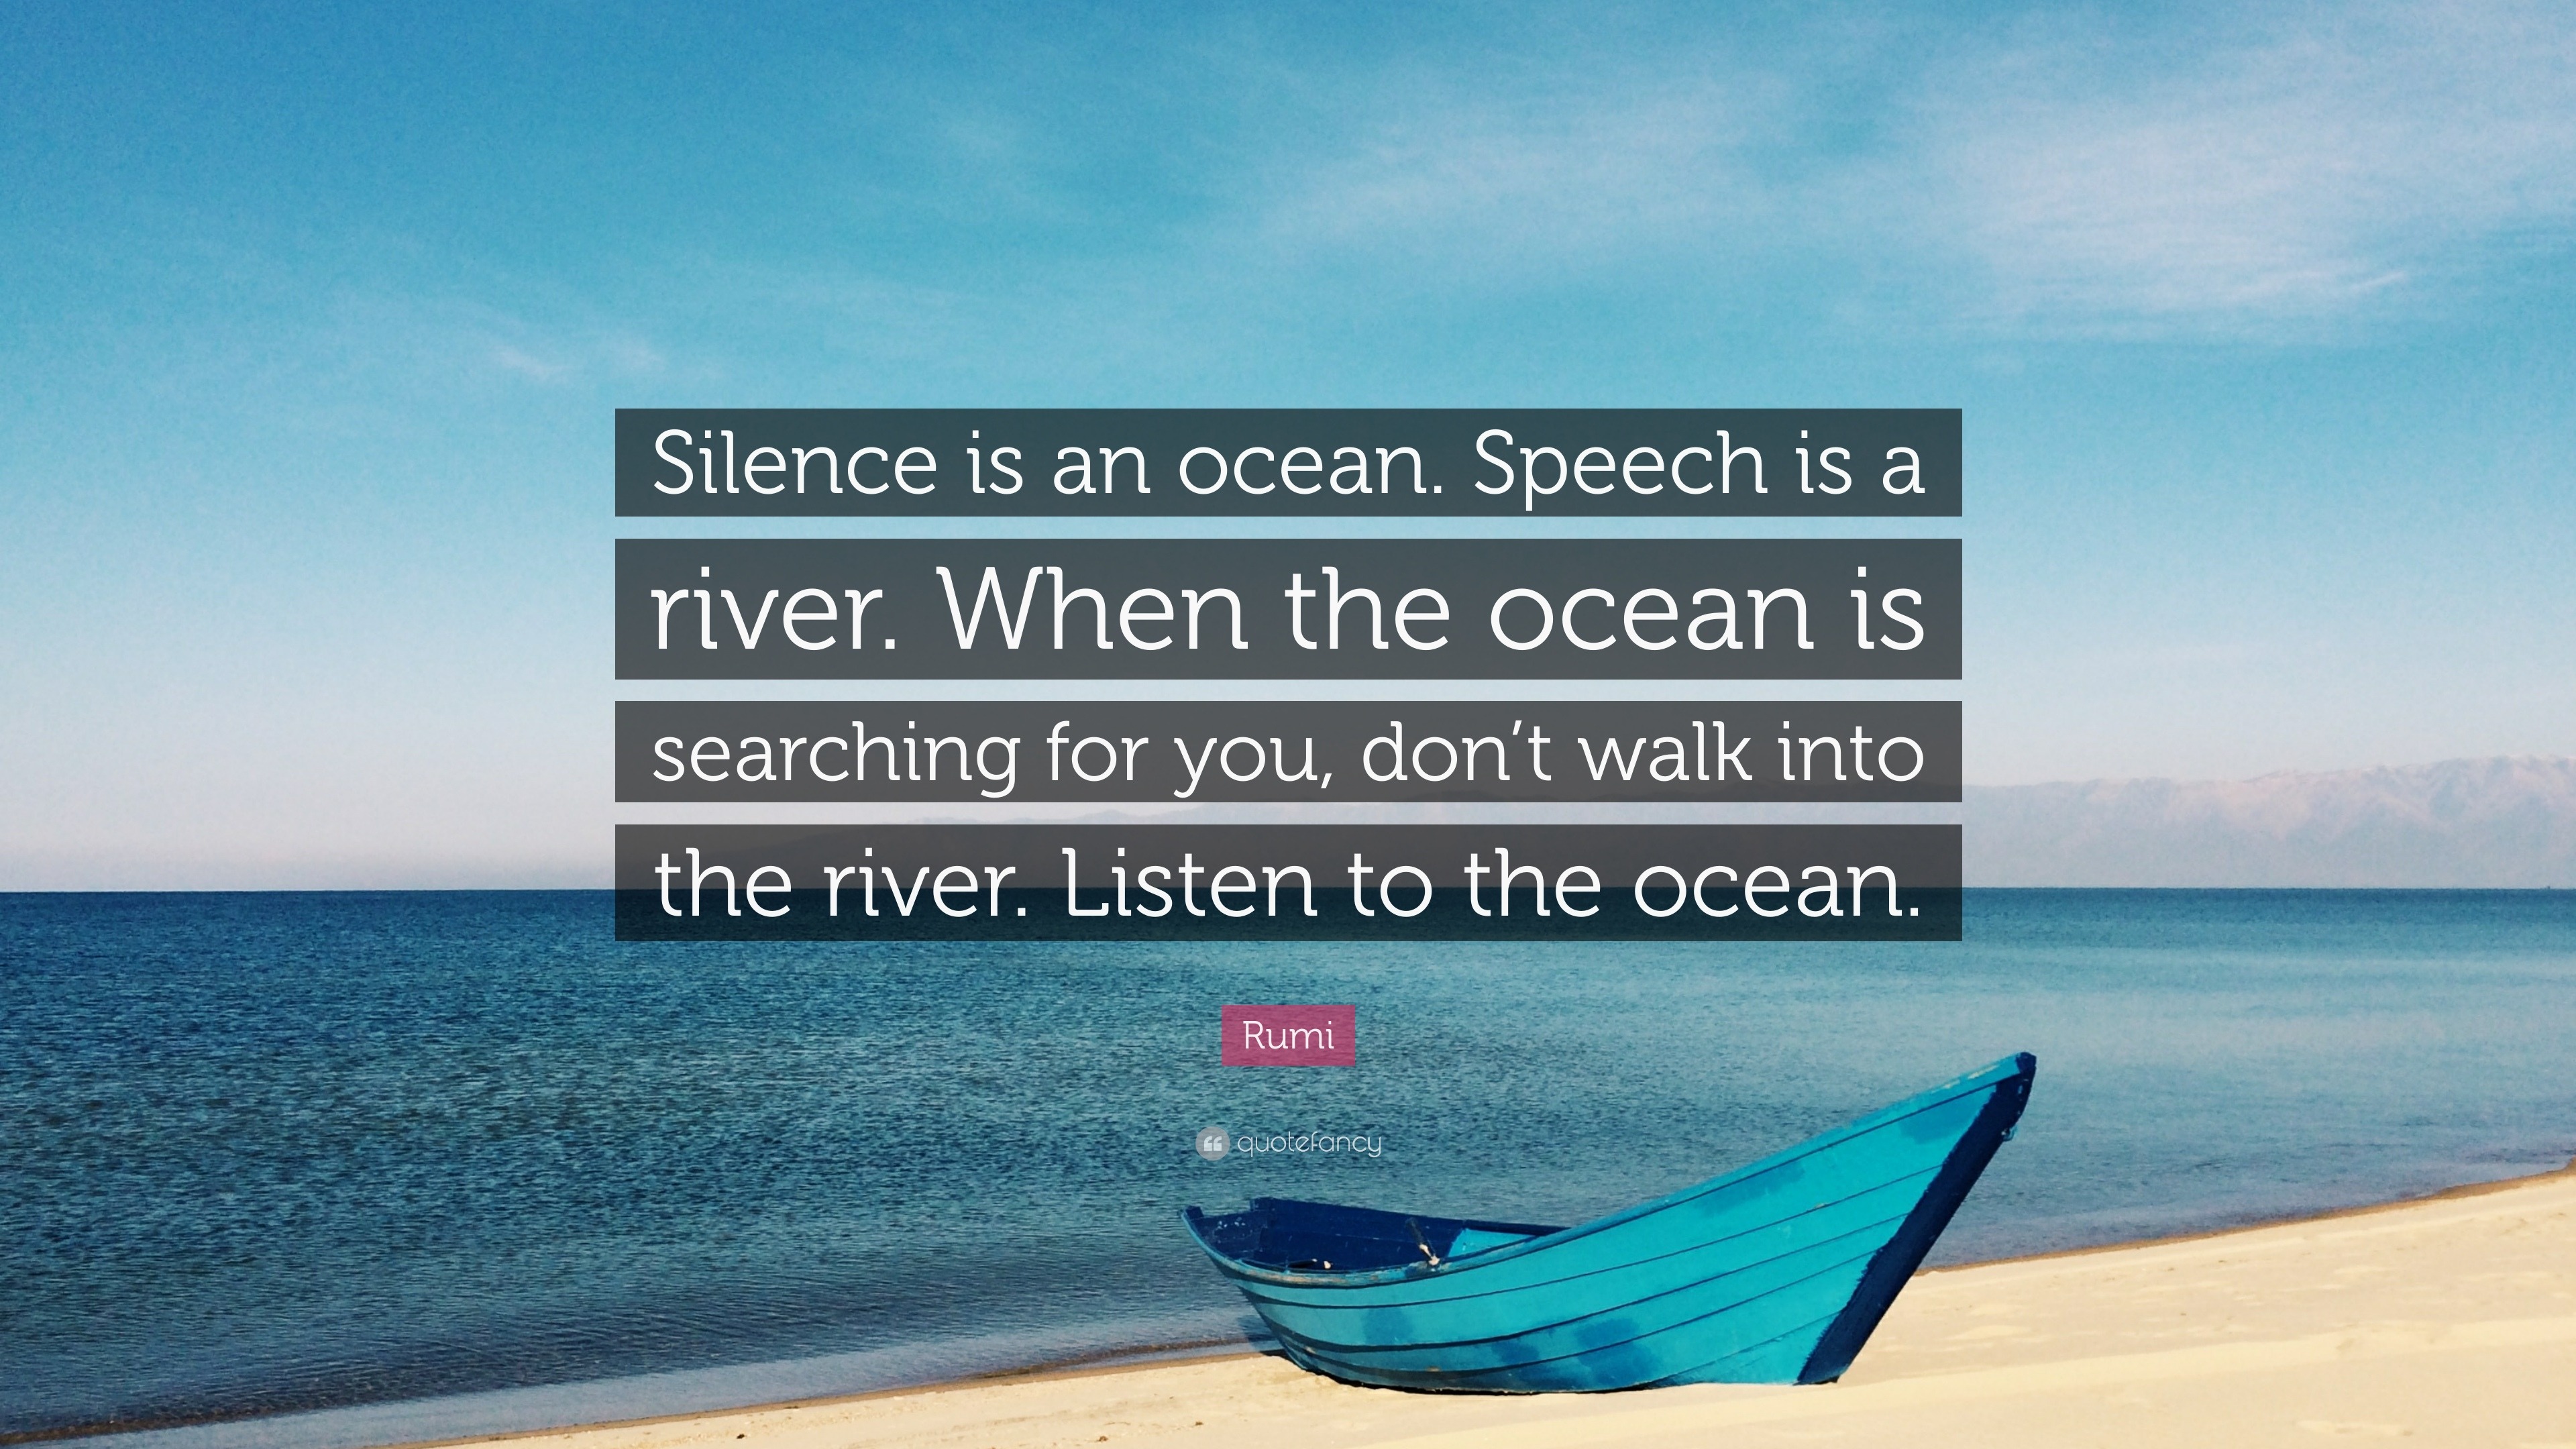 Rumi Quote: “Silence is an ocean. Speech is a river. When the ocean is